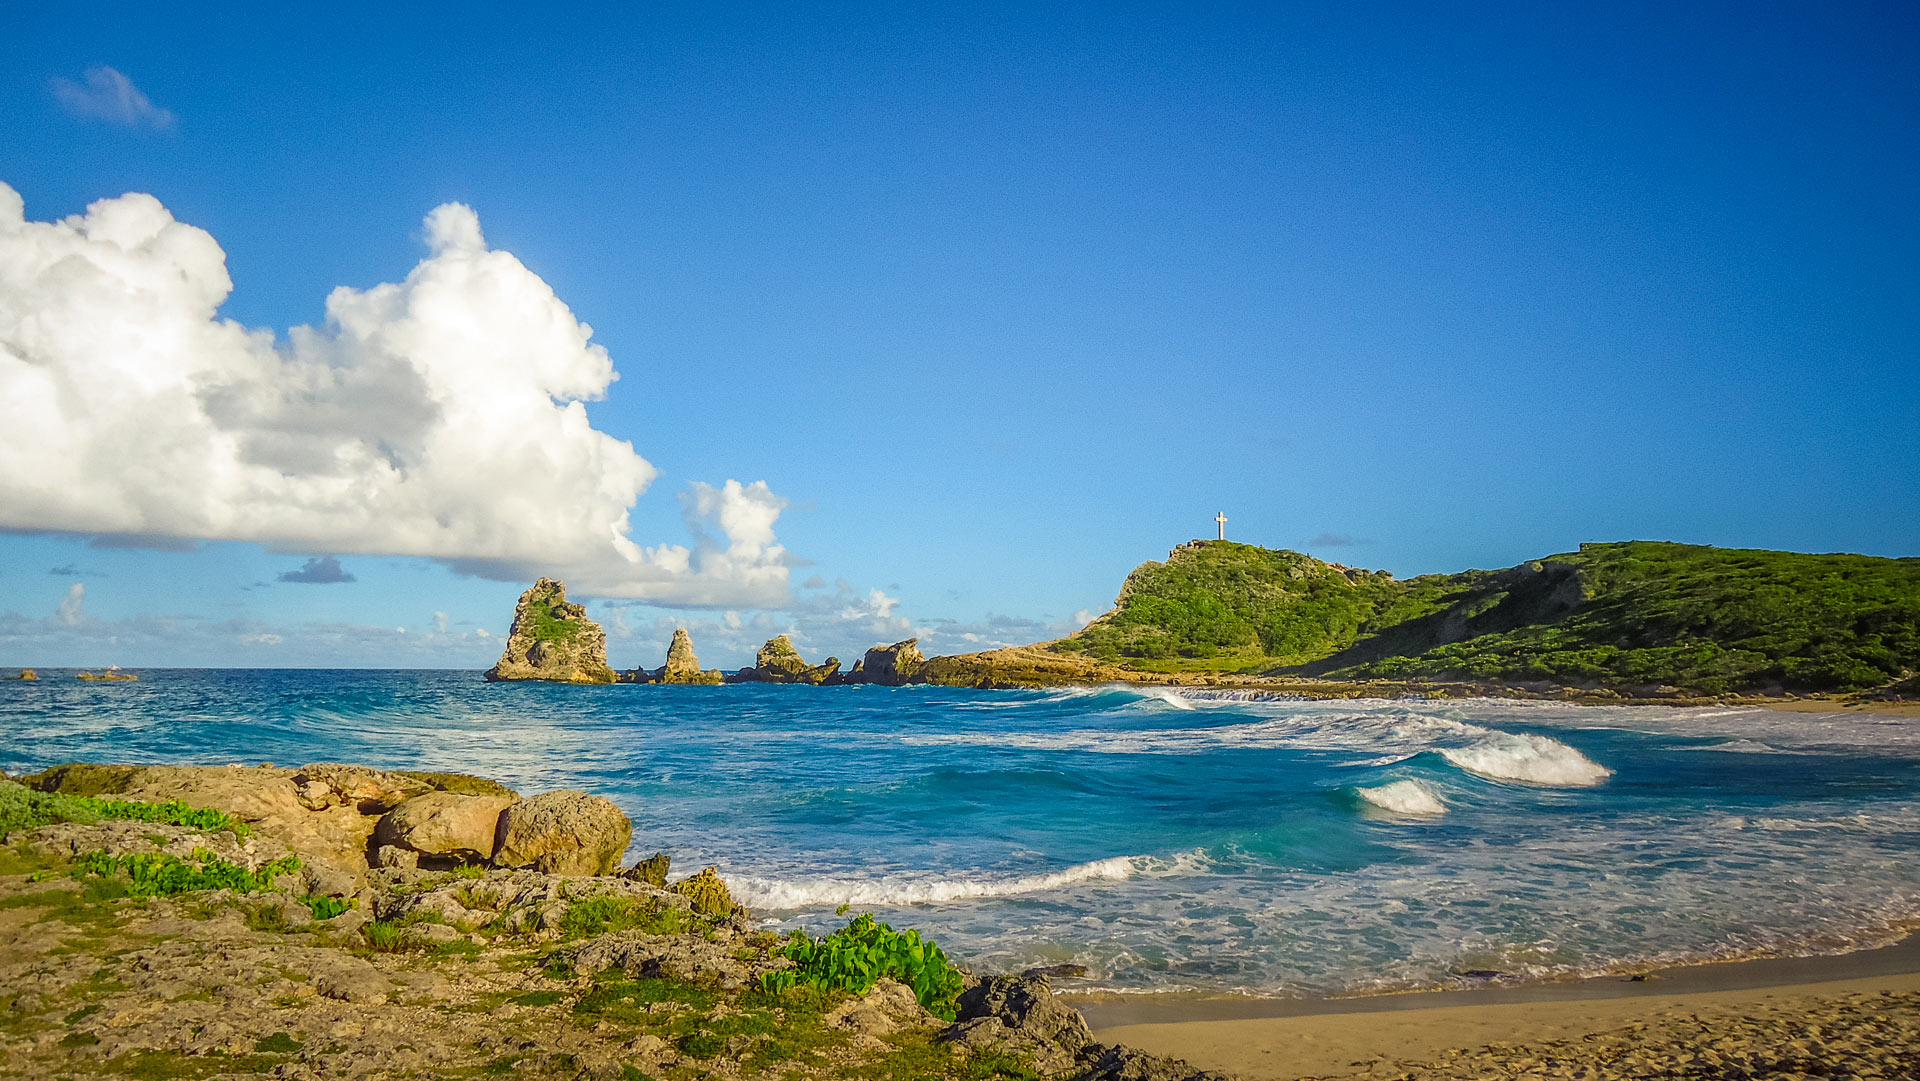 10 jours en guadeloupe itineraire ultime nos conseils voyage tips